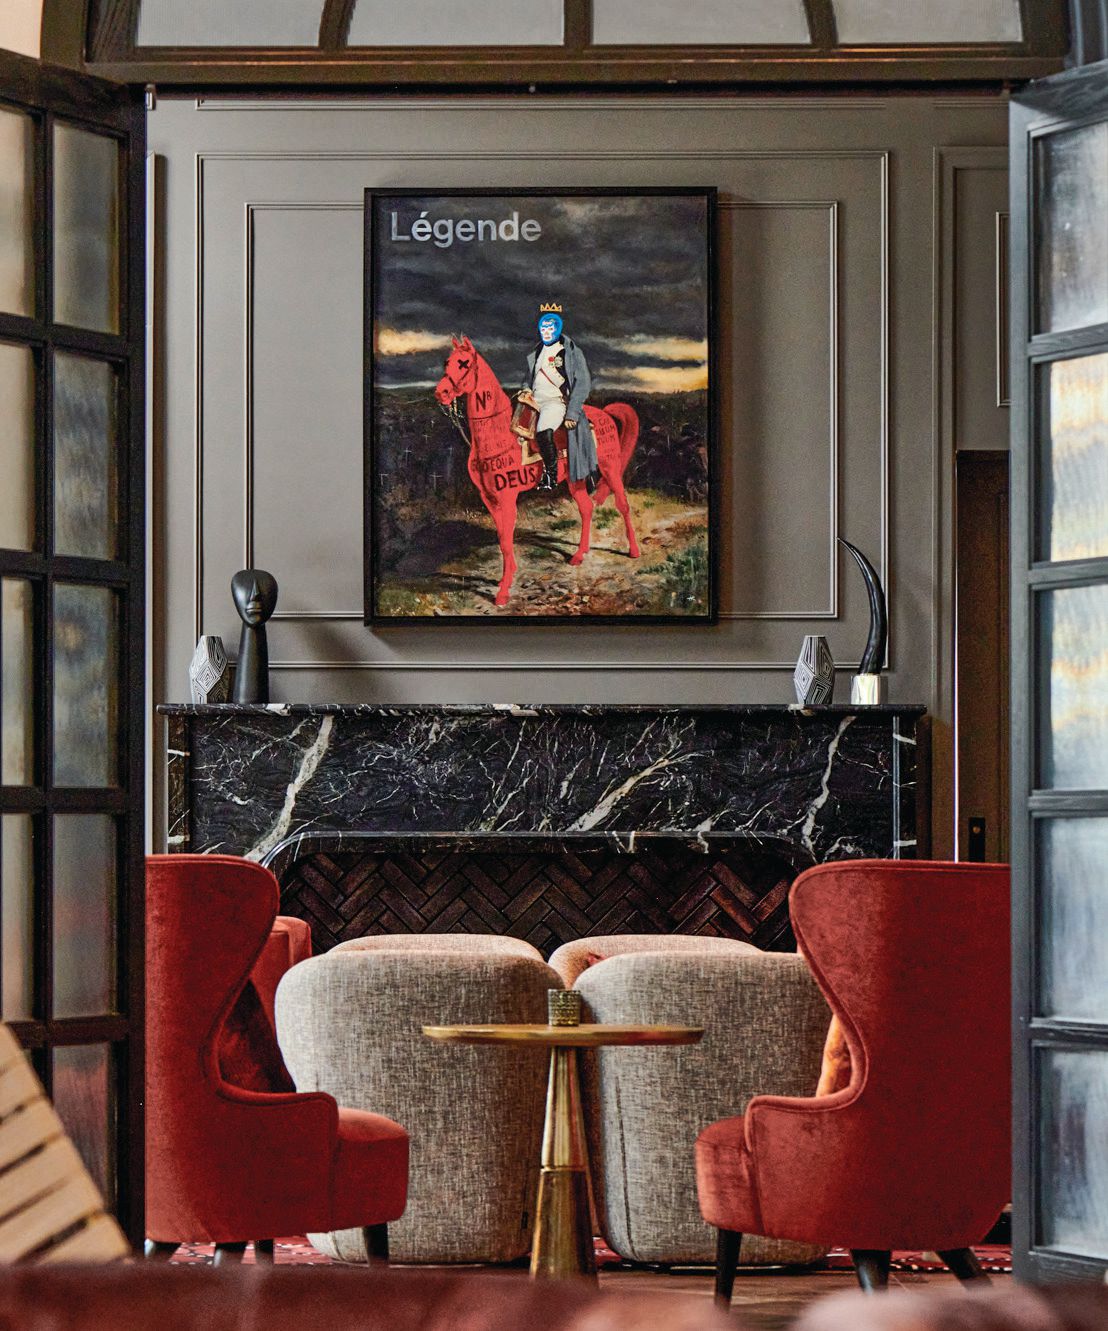 Heath Kane’s “Légende” hangs in a parlor, which is frequently the backdrop to intimate private events. PHOTO COURTESY OF DAXTON HOTEL